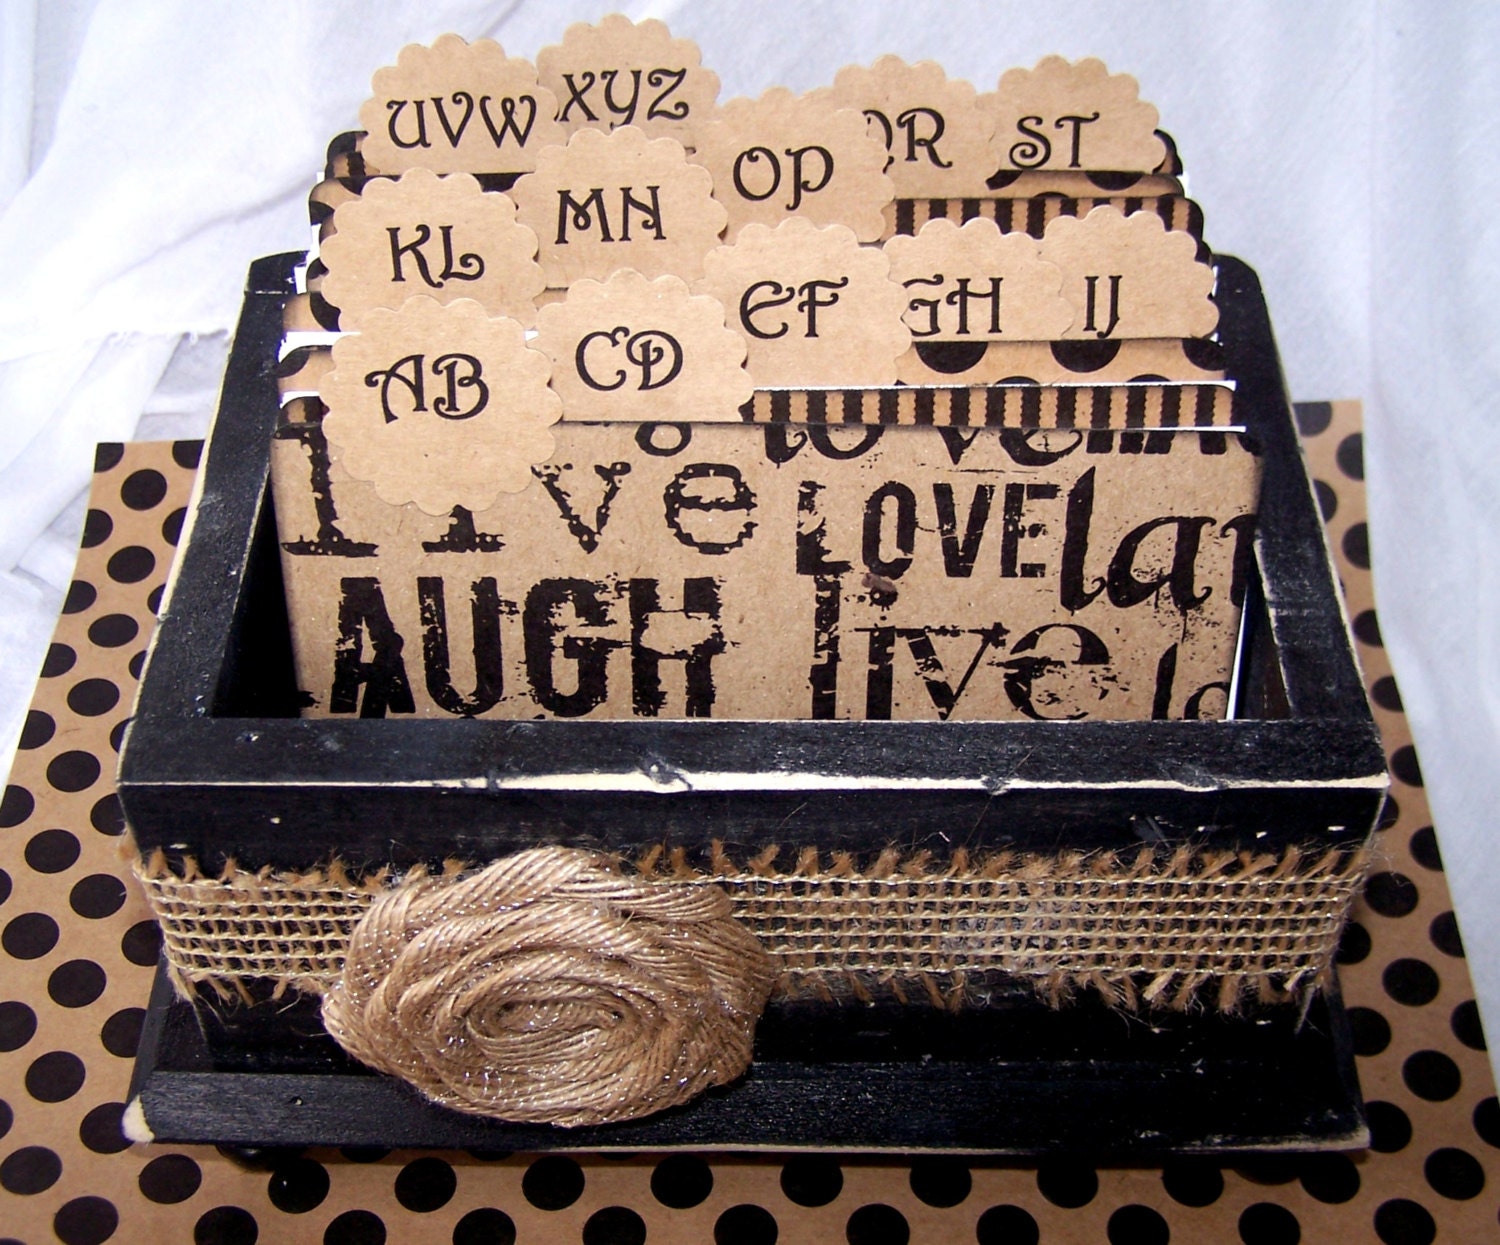 Wedding Guest Book Box- Black Distressed Shabby Chic Box, Live, Love, Laugh, Burlap Ribbon and rosette, Rustic